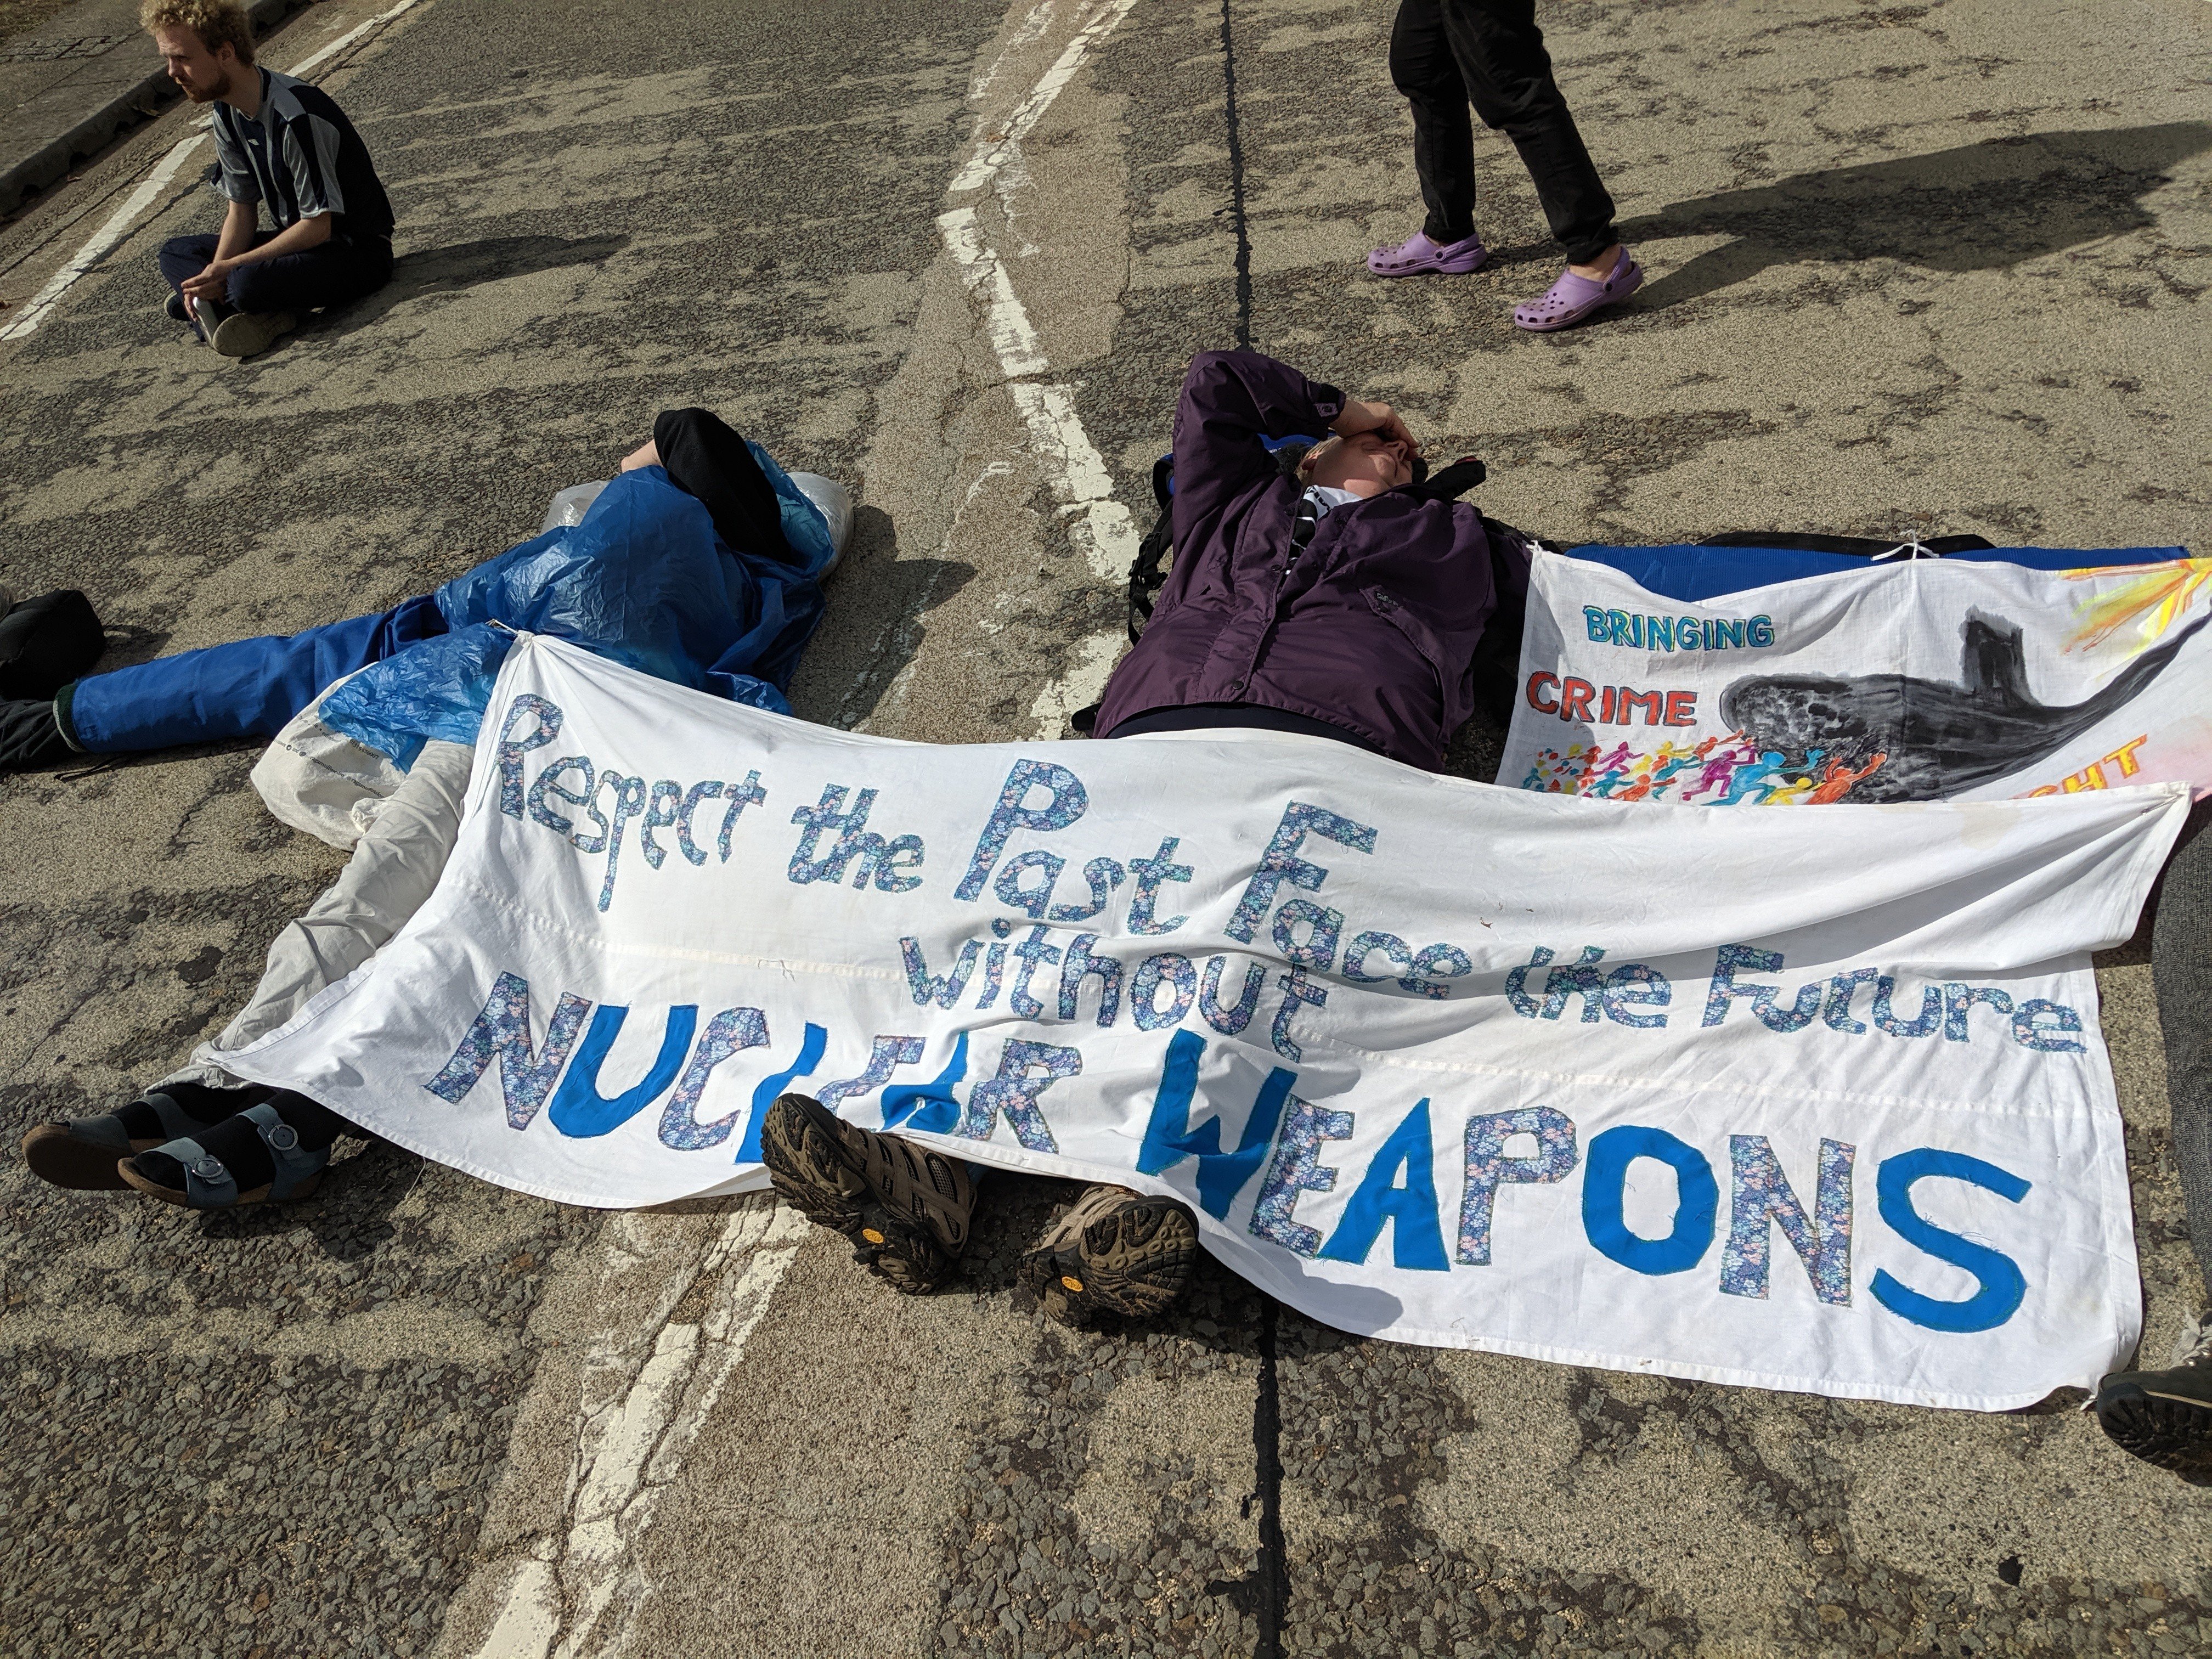 Activists locked on to block entry to the DSEI site